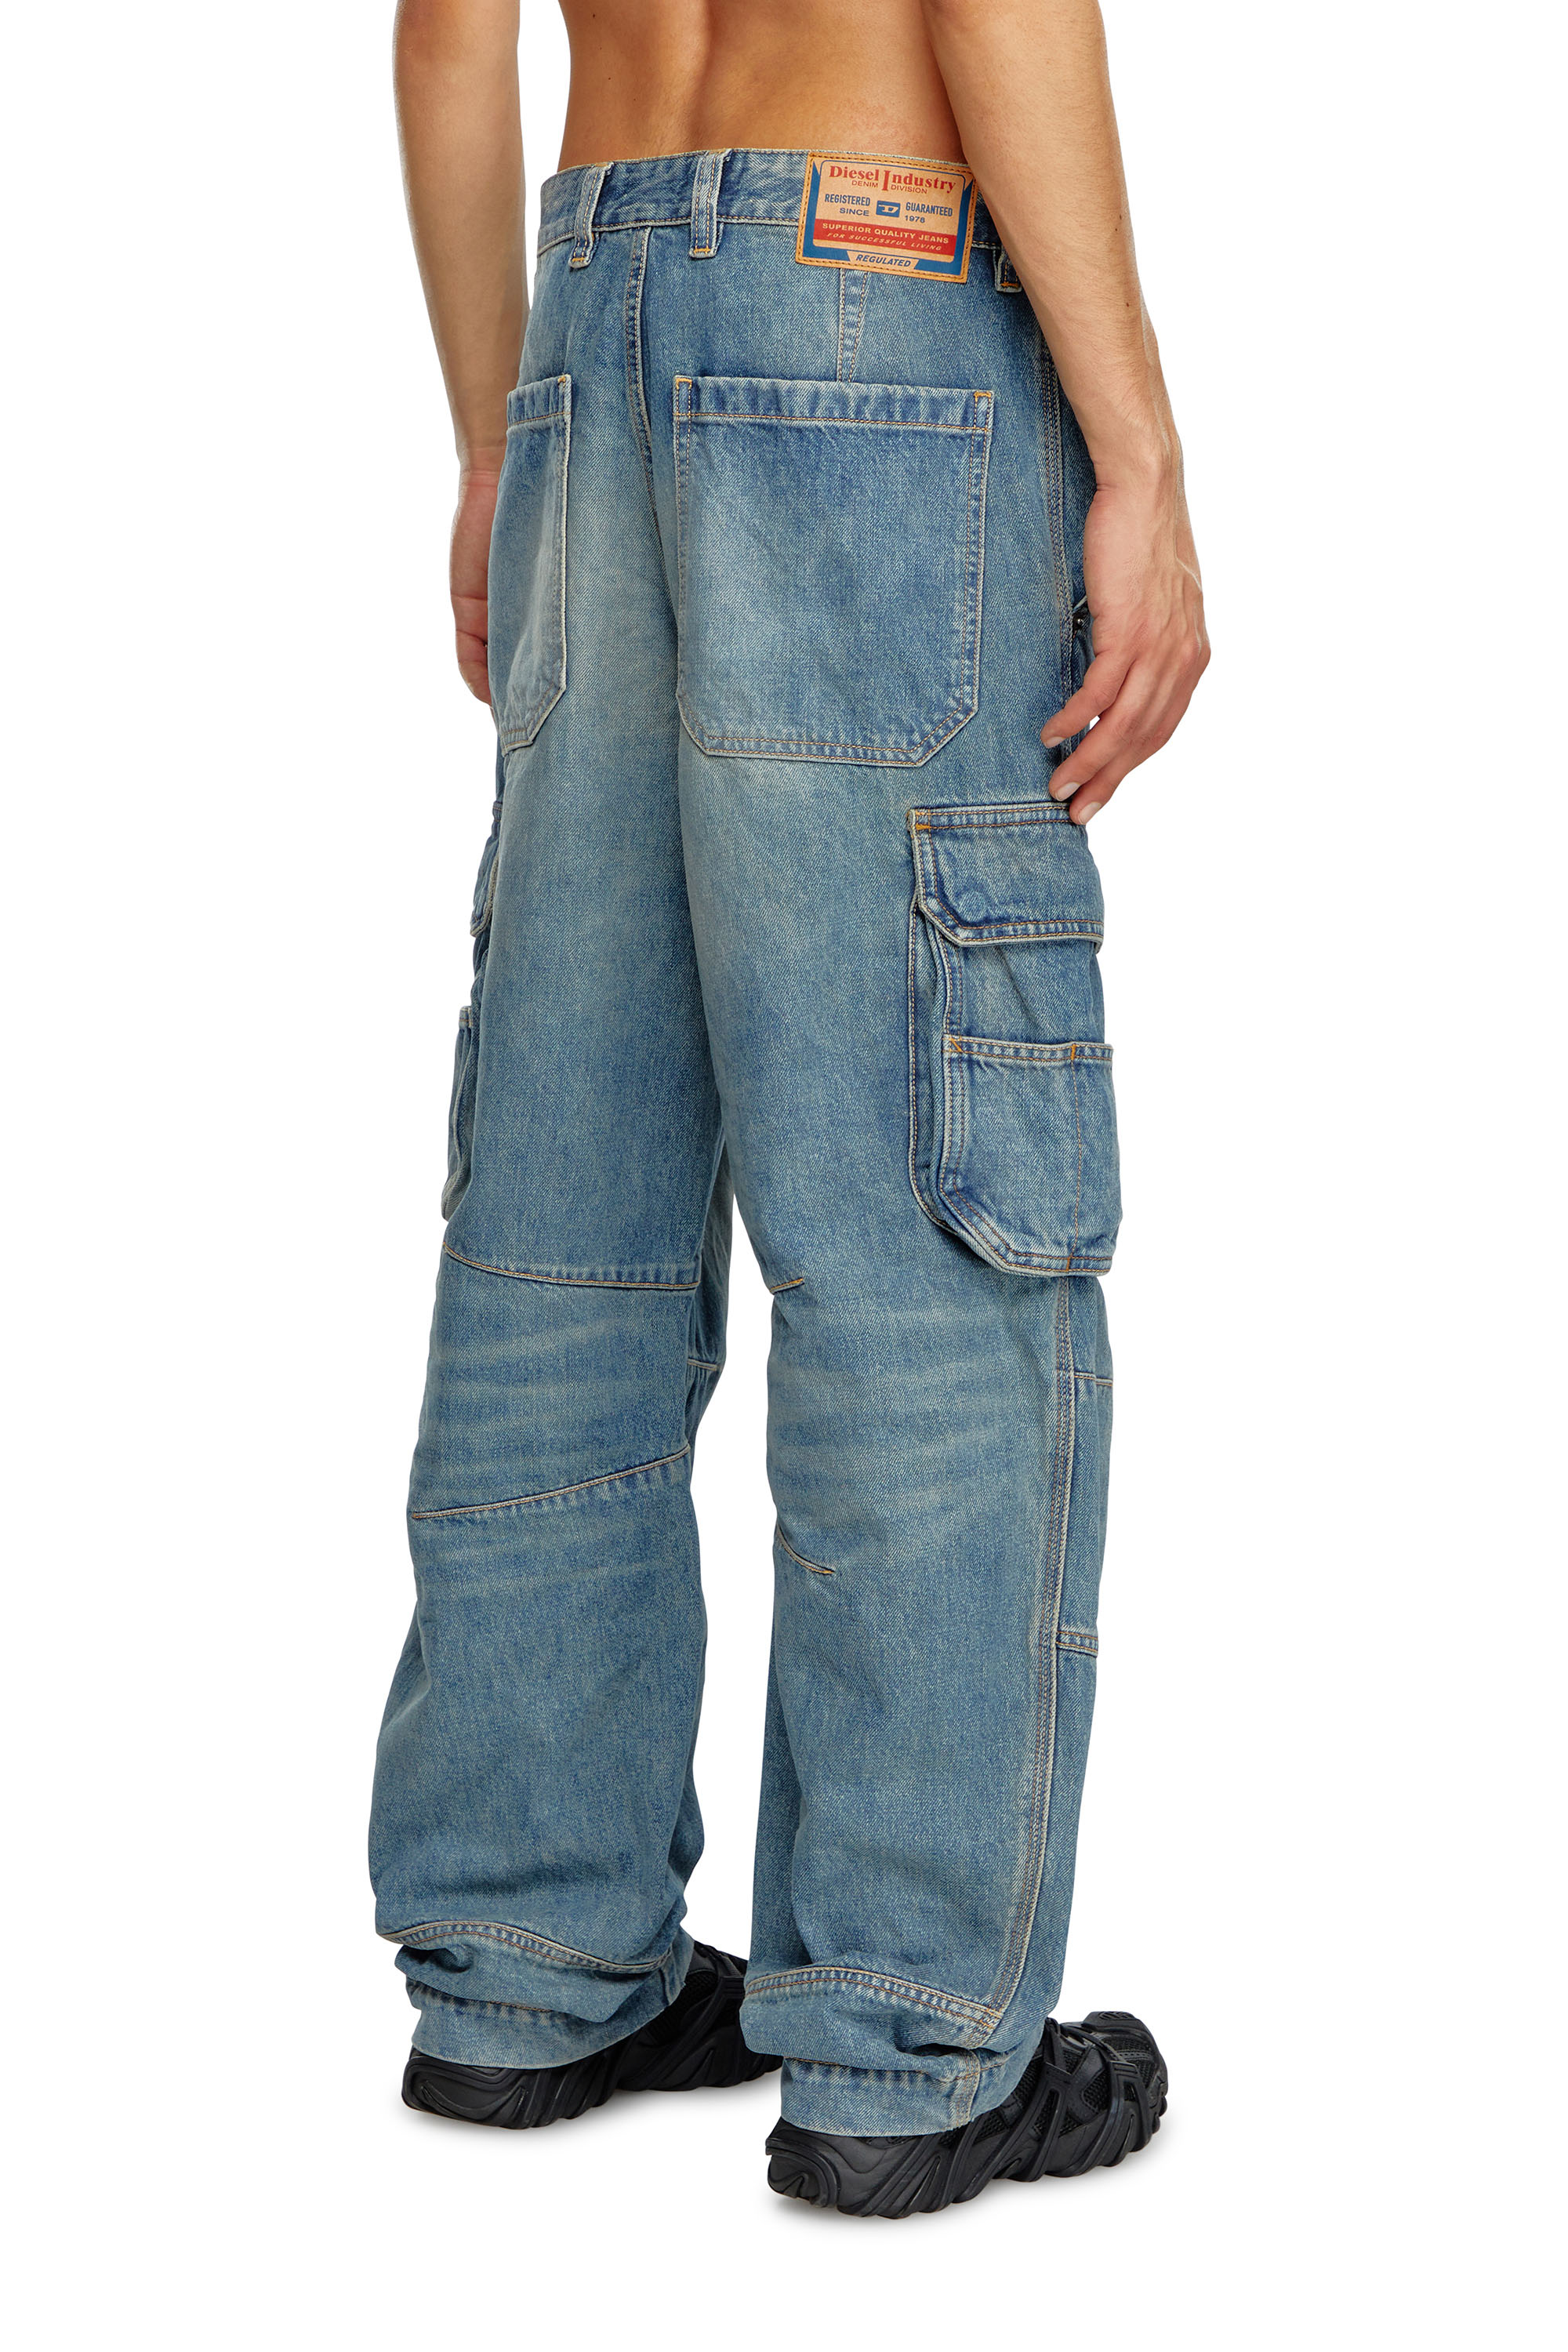 Diesel - Straight Jeans D-Fish 09J83, Hombre Straight Jeans - D-Fish in Azul marino - Image 3